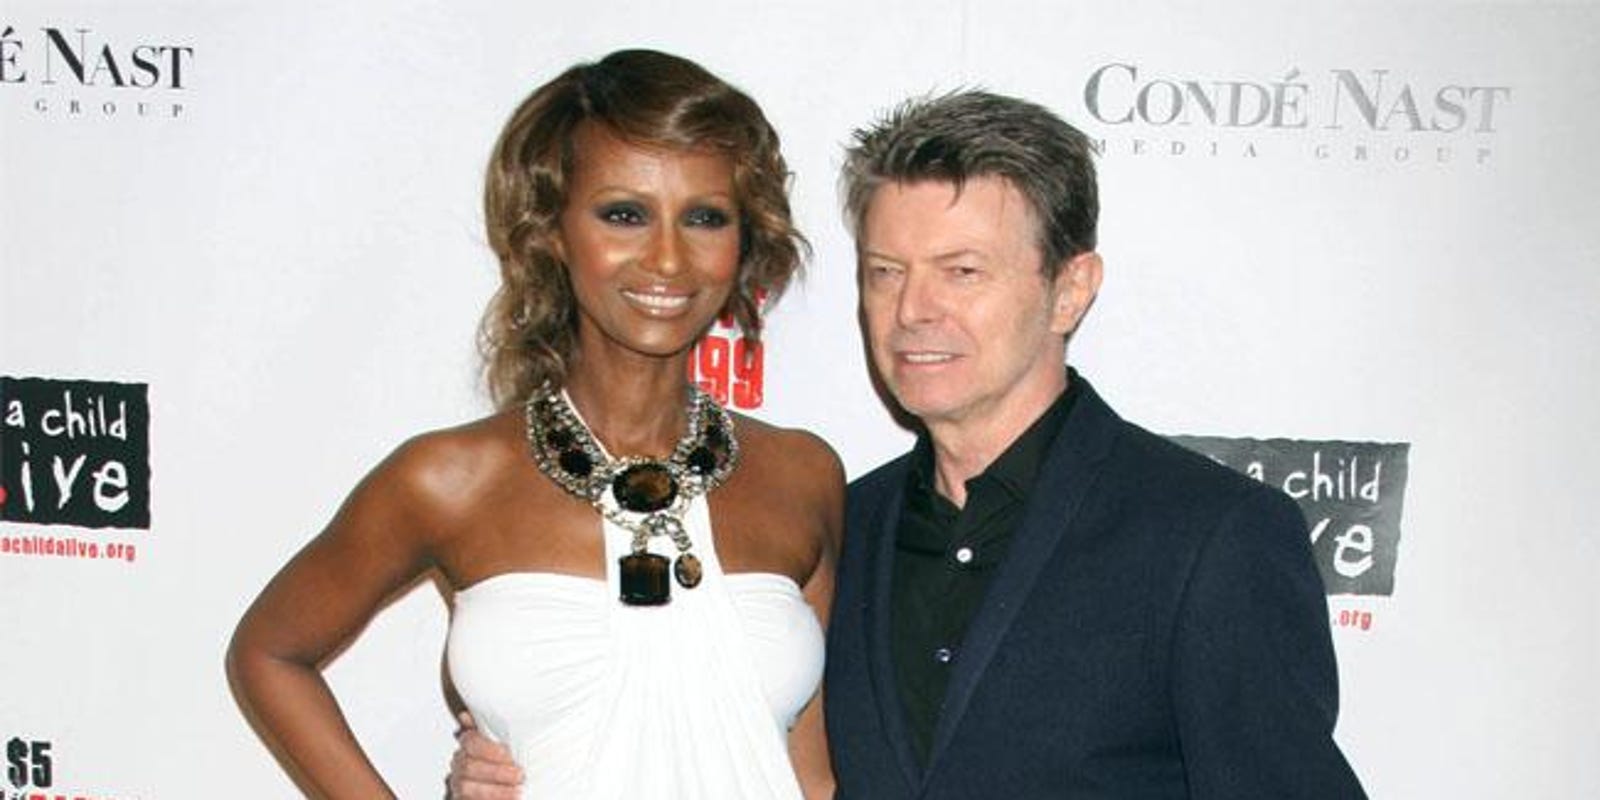 Tall Naked Beach - David Bowie was lonely before meeting Iman